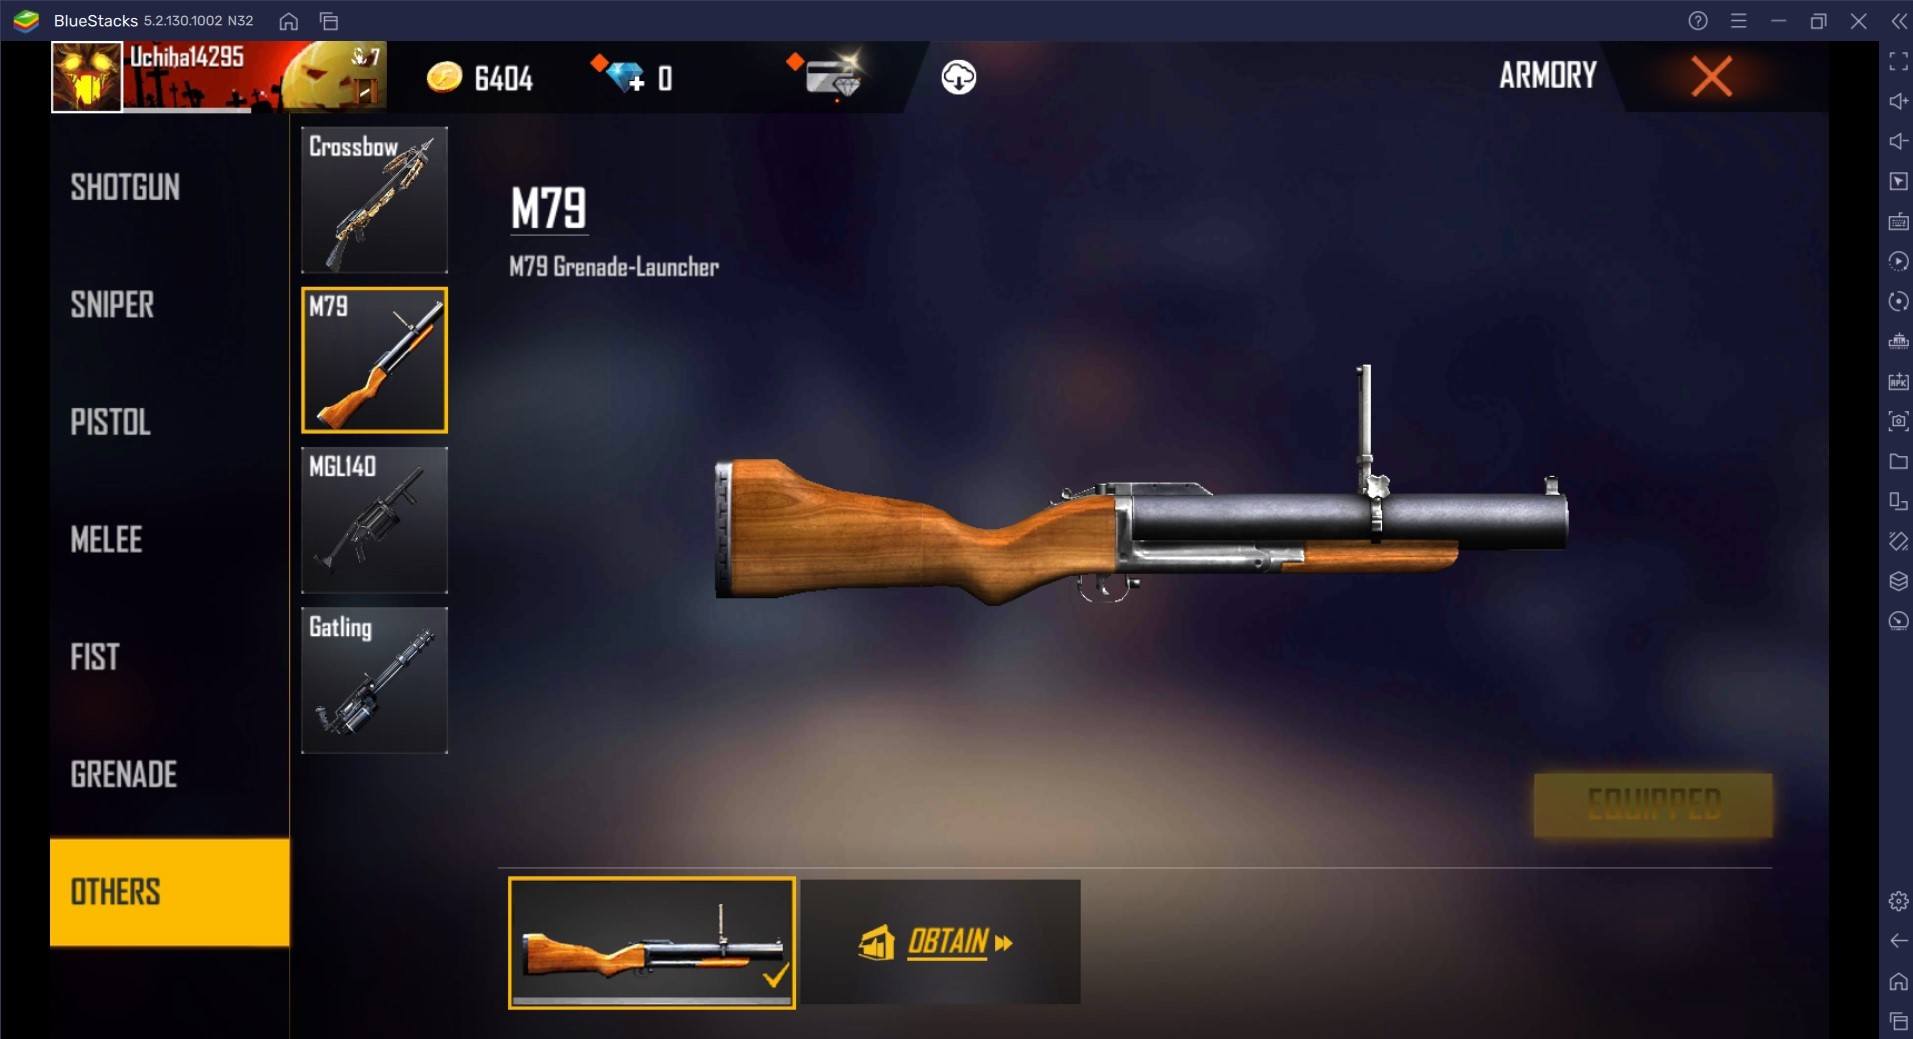 Free Fire Weapons Guide: The Top 10 Guns